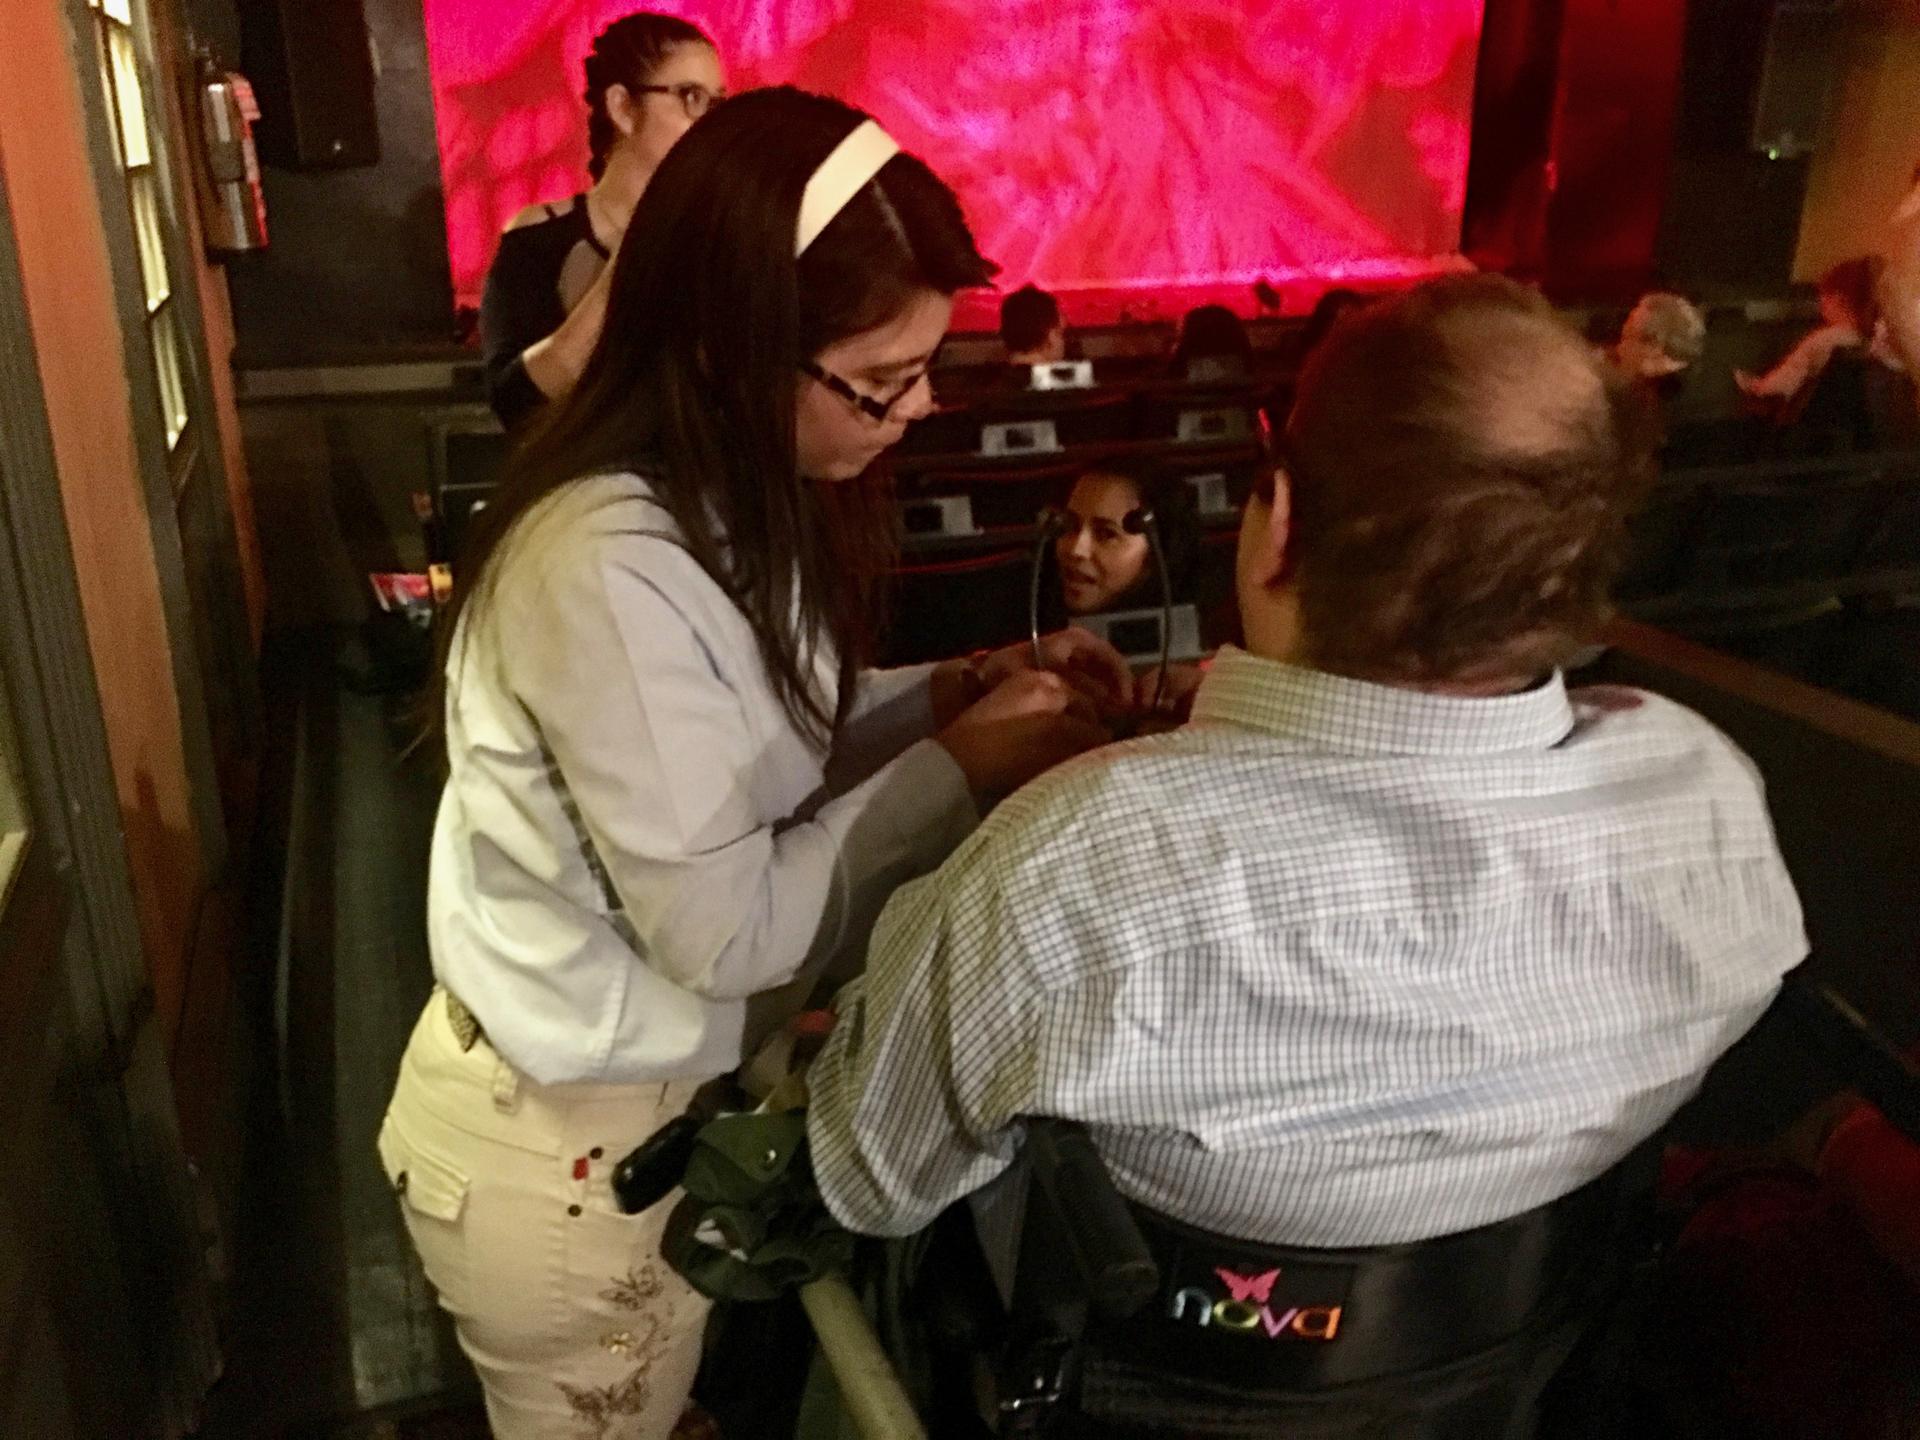 people help explain audio description equipment to visually impaired theater goers